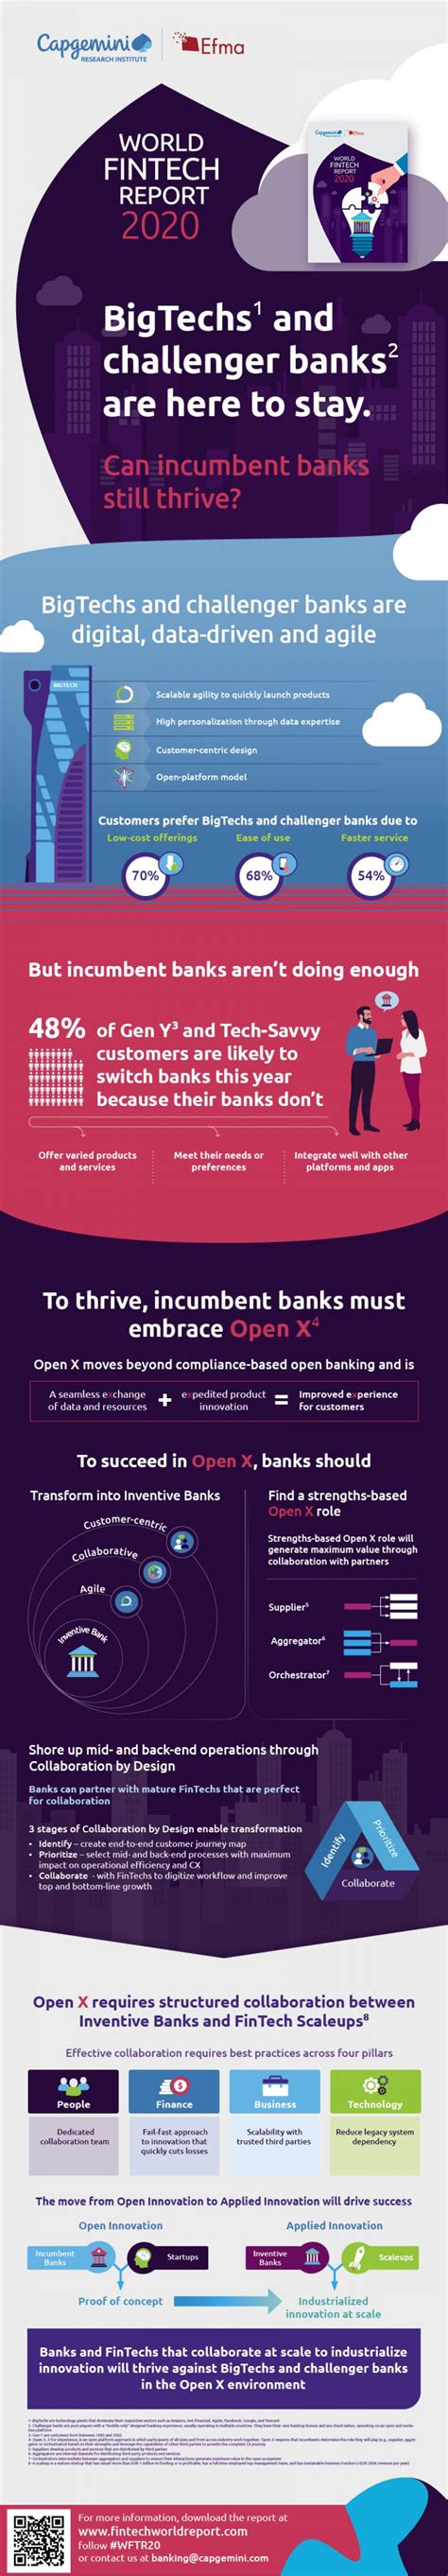 overview of the world fintech report 2020 by capgemini infographic